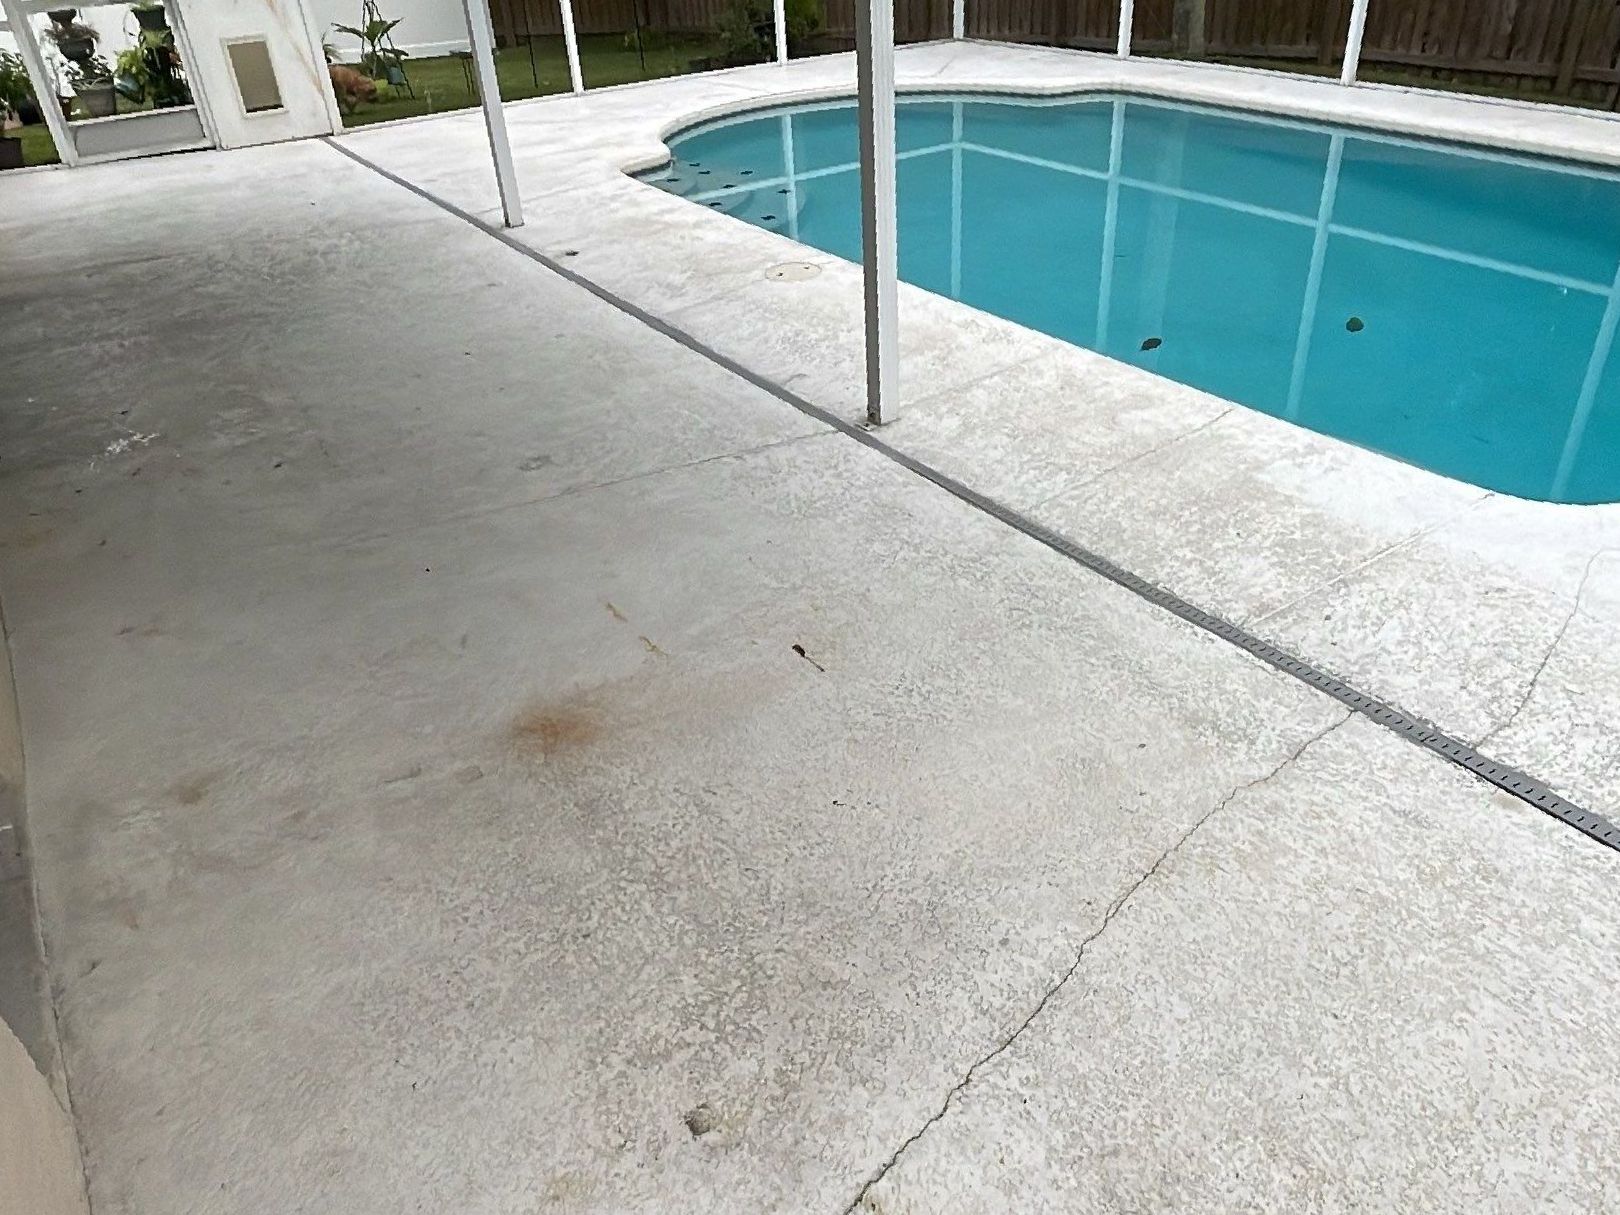 Cracked and stained bare concrete pool deck 